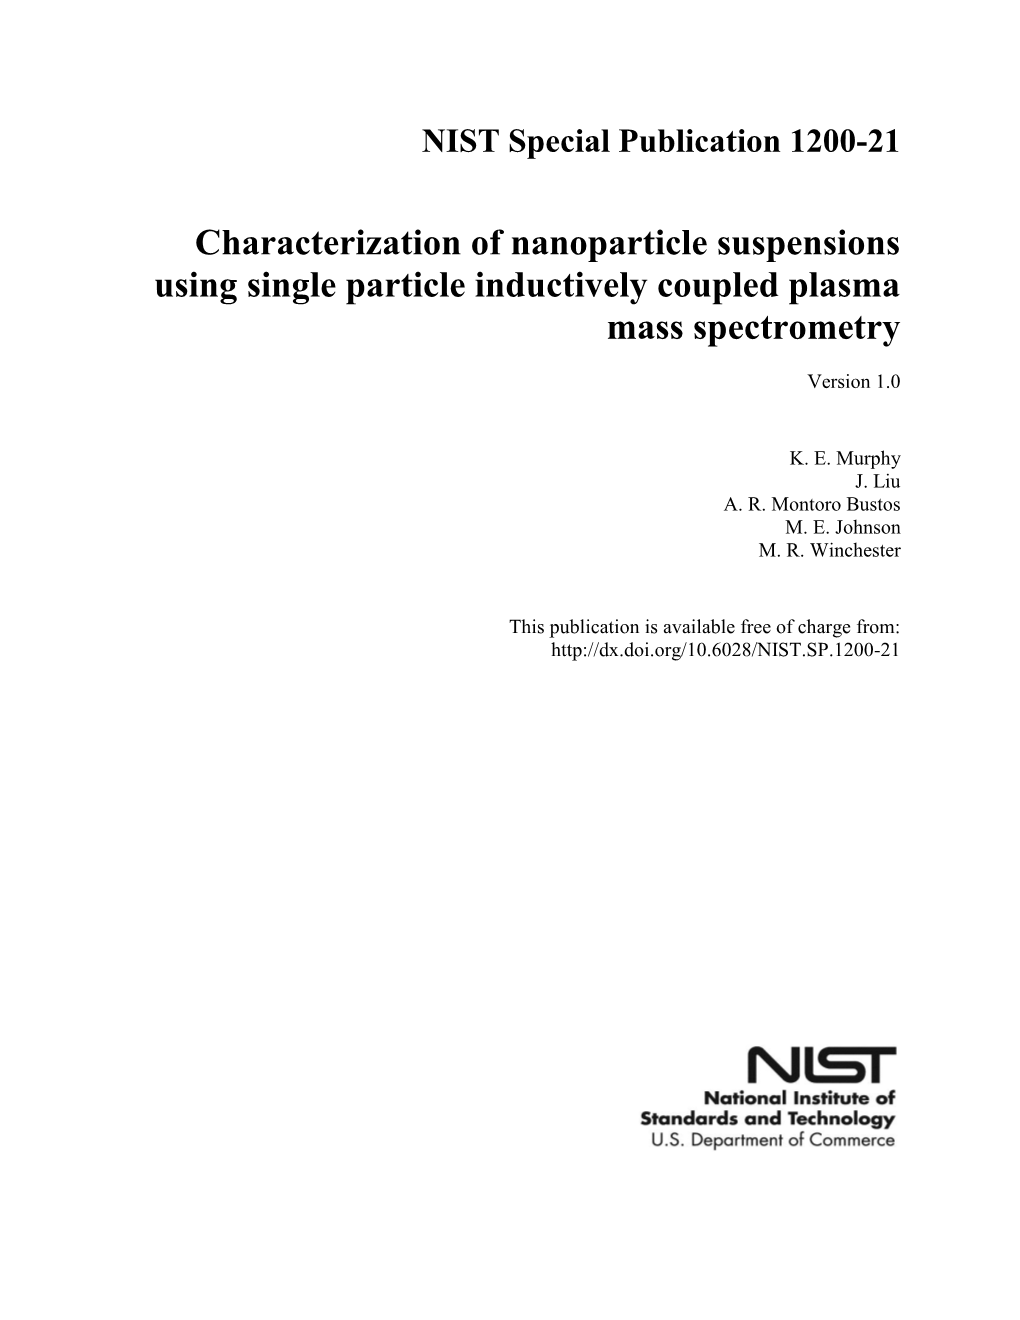 Characterization of Nanoparticle Suspensions Using Single Particle Inductively Coupled Plasma Mass Spectrometry